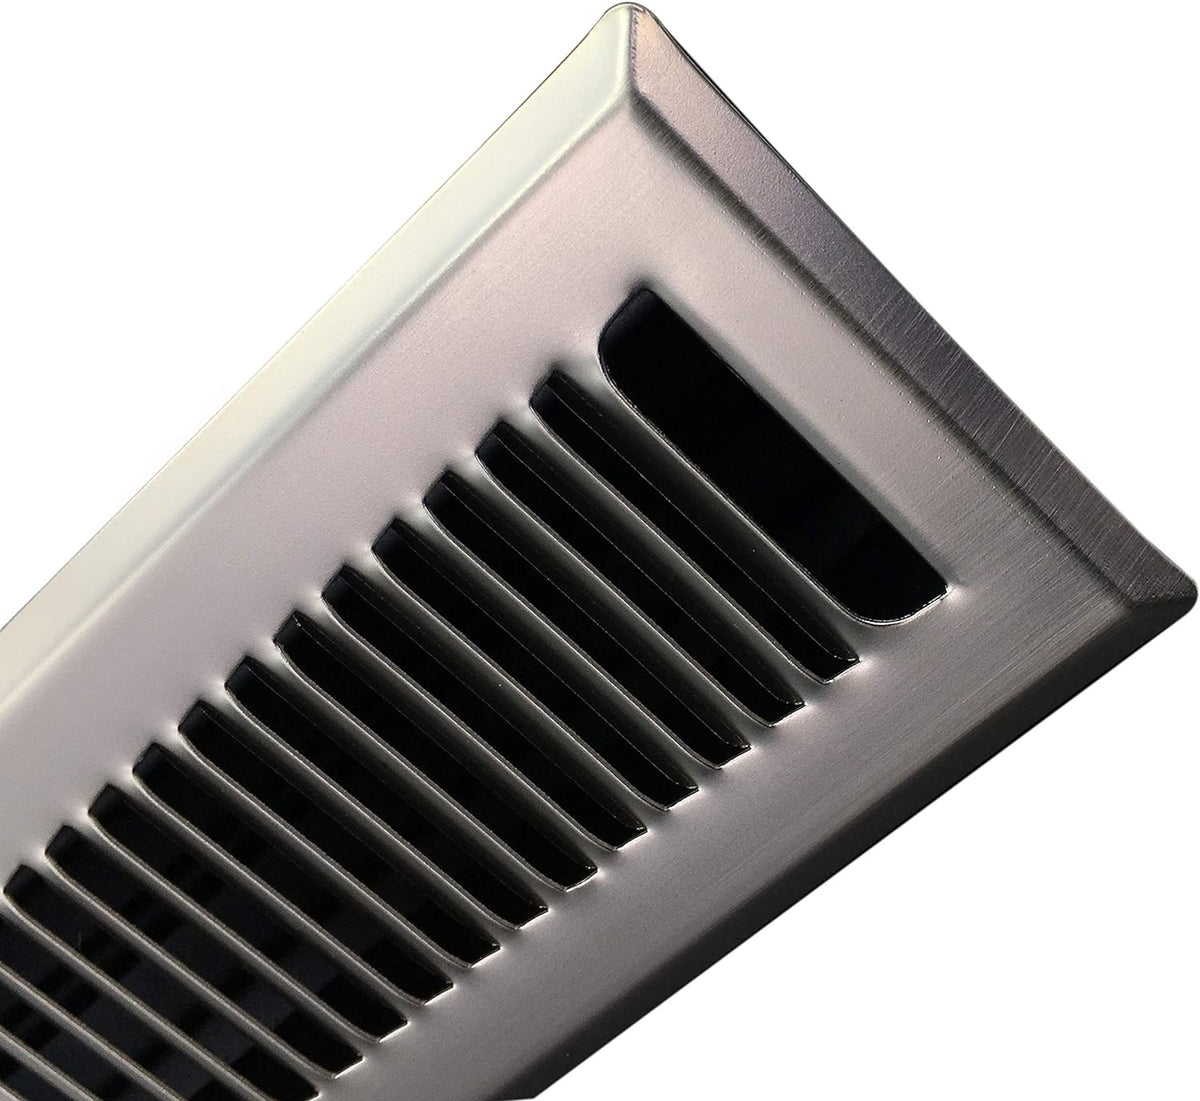 2&quot; X 12&quot; Modern Floor Register Grille with Dampers - Contempo Slotted Grate - HVAC Vent Duct Cover - Chrome